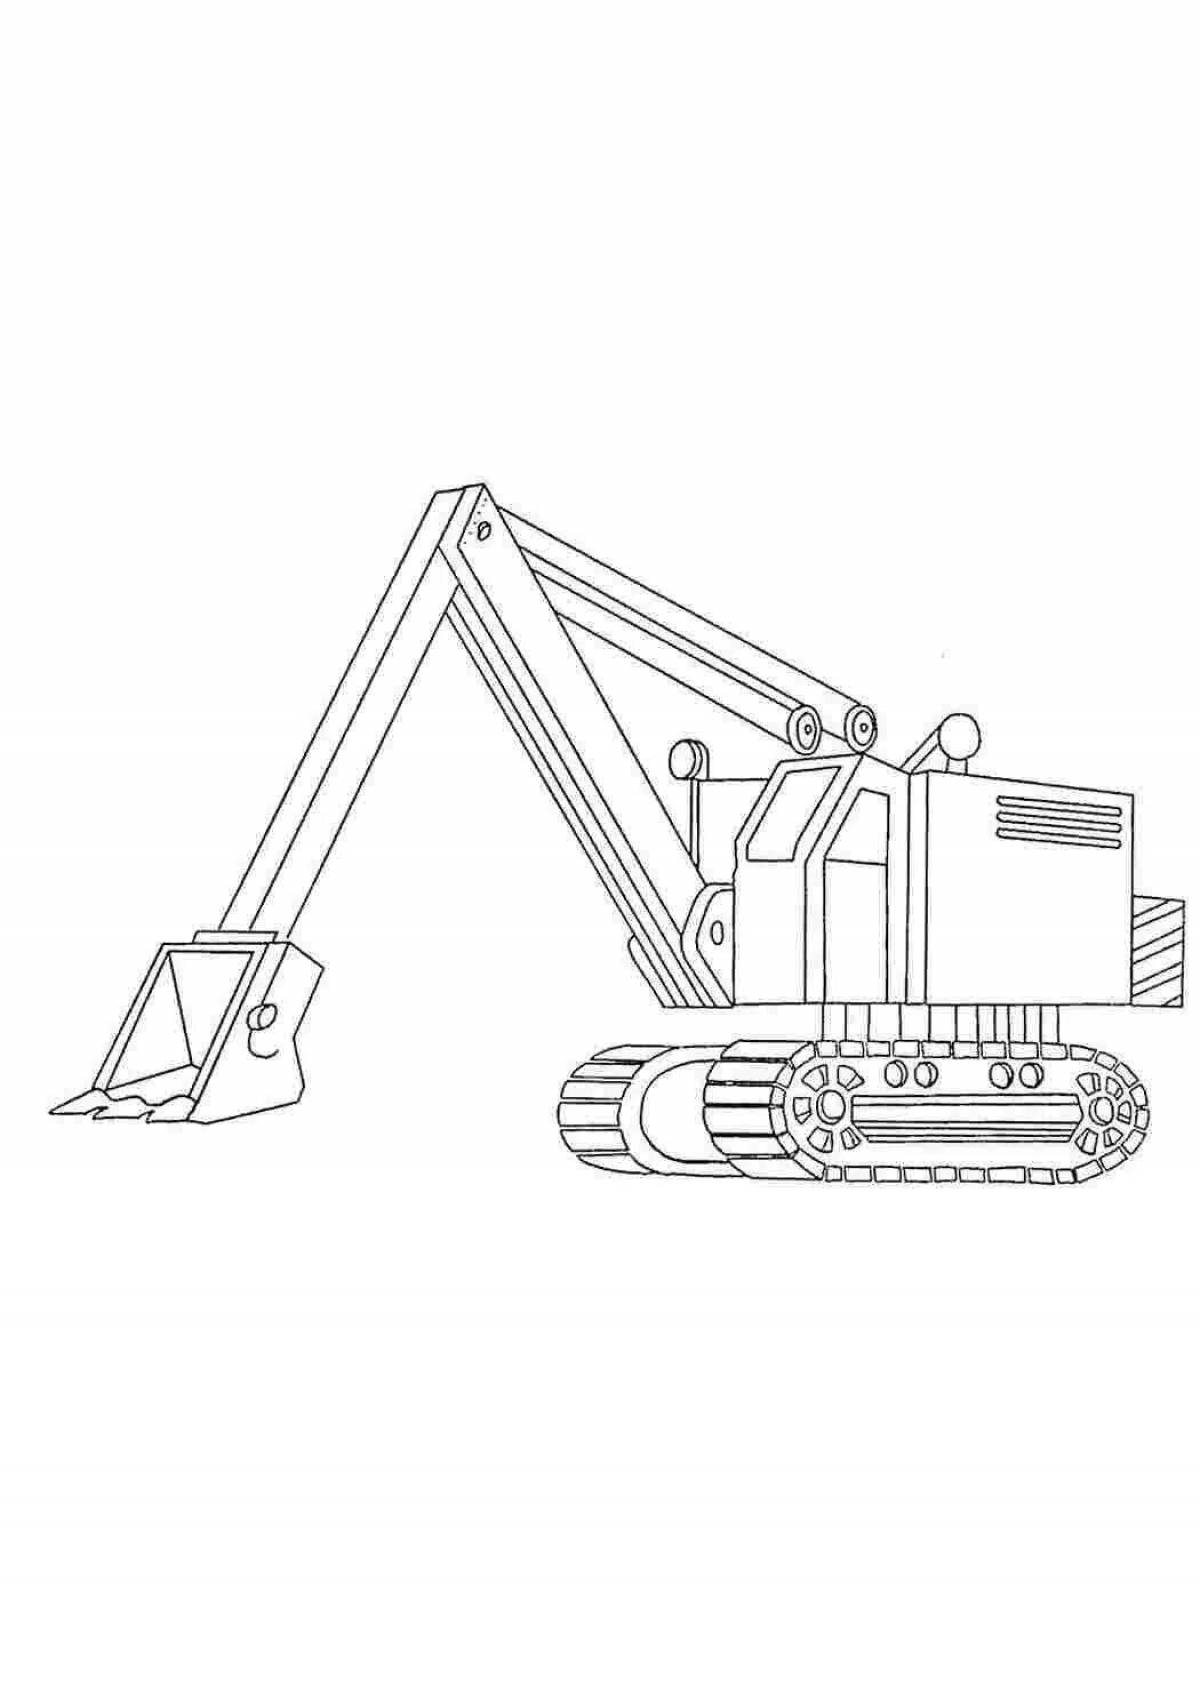 Fun coloring book for construction vehicles for kids